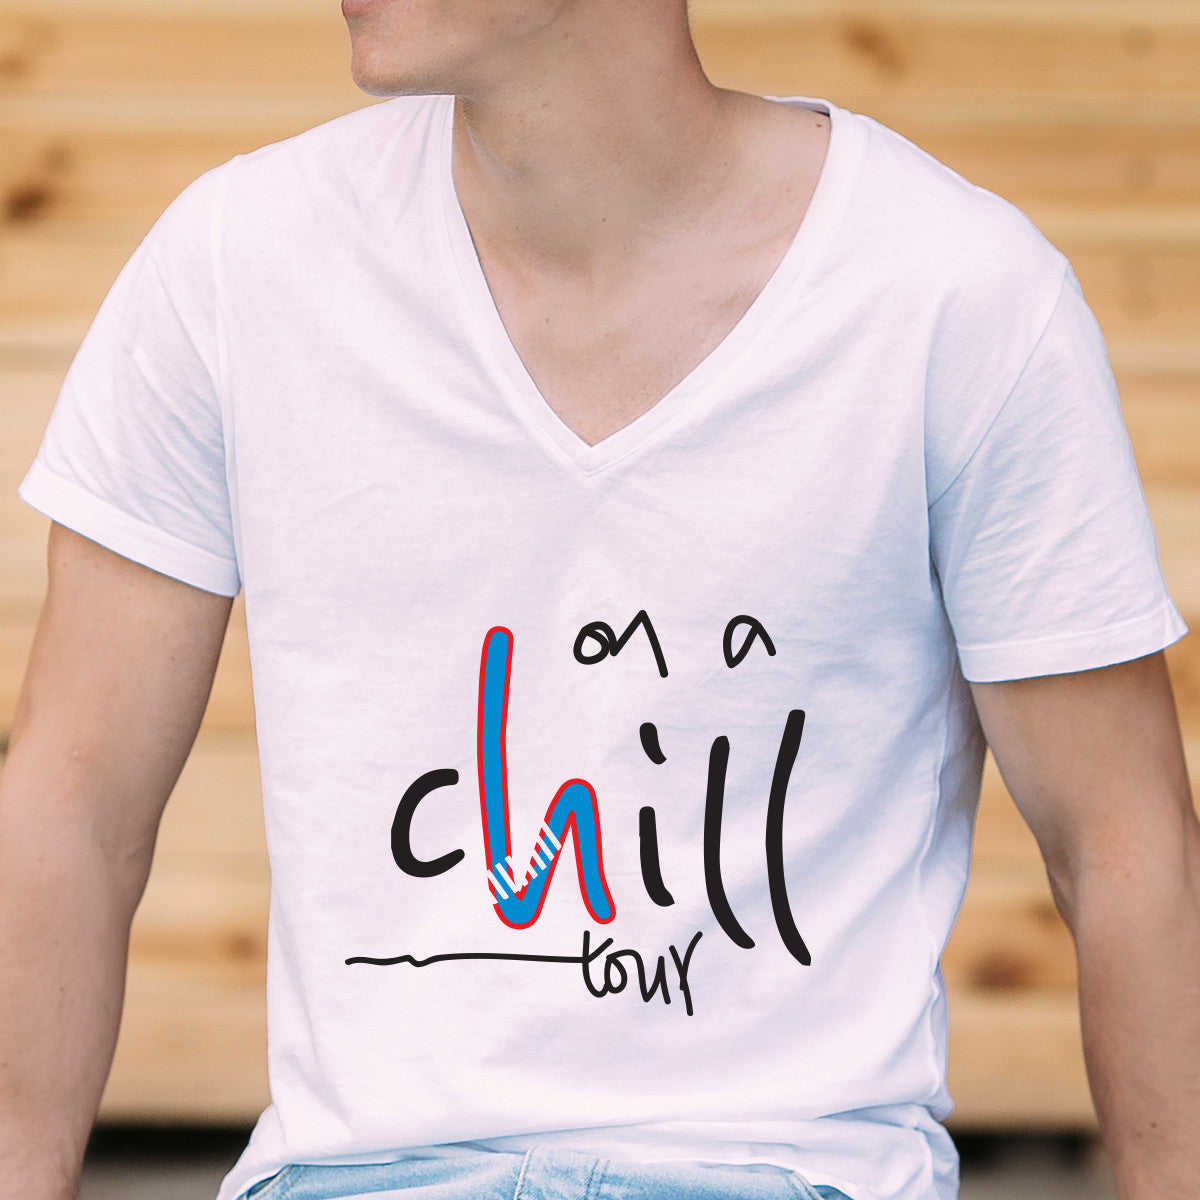 On A Chill Tour V-Neck T-shirt